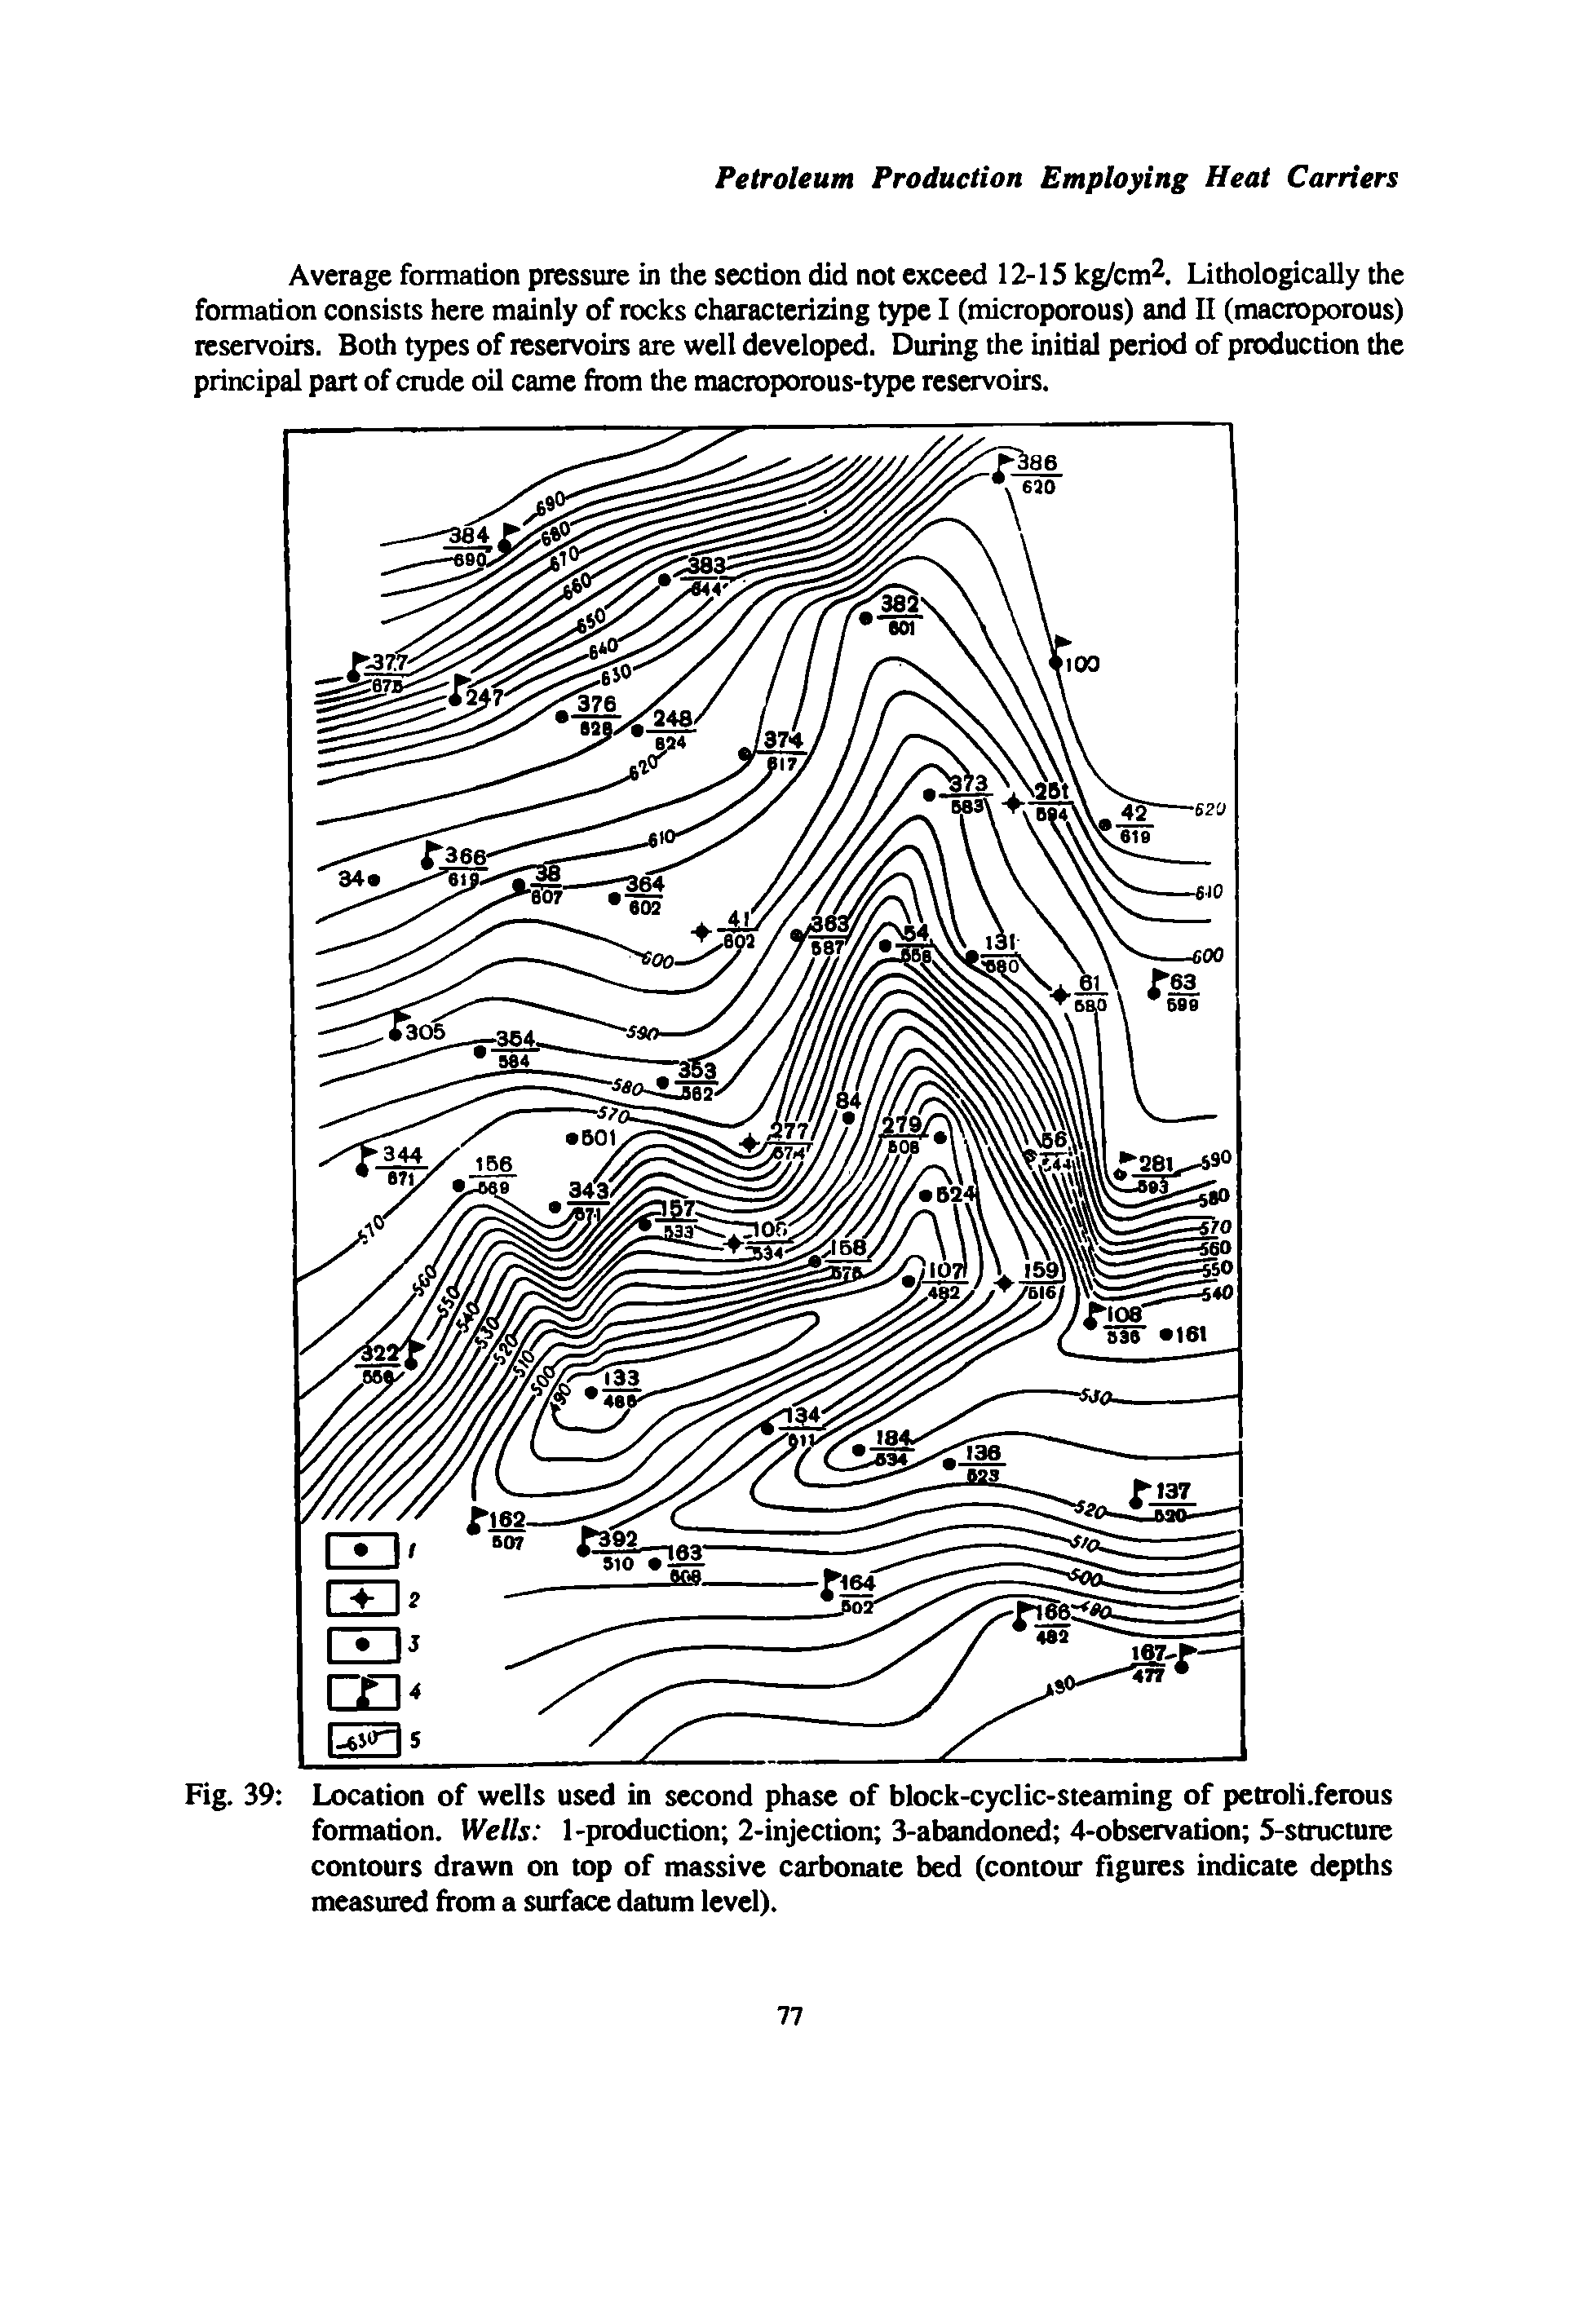 Fig. 39 Location of wells used in second phase of block-cyclic-steaming of petroli.ferous formation. Wells 1-production 2-injection 3-abandoned 4-observation S-stnicture contours drawn on top of massive carbonate bed (contour figures indicate depths measured from a surface datum level).